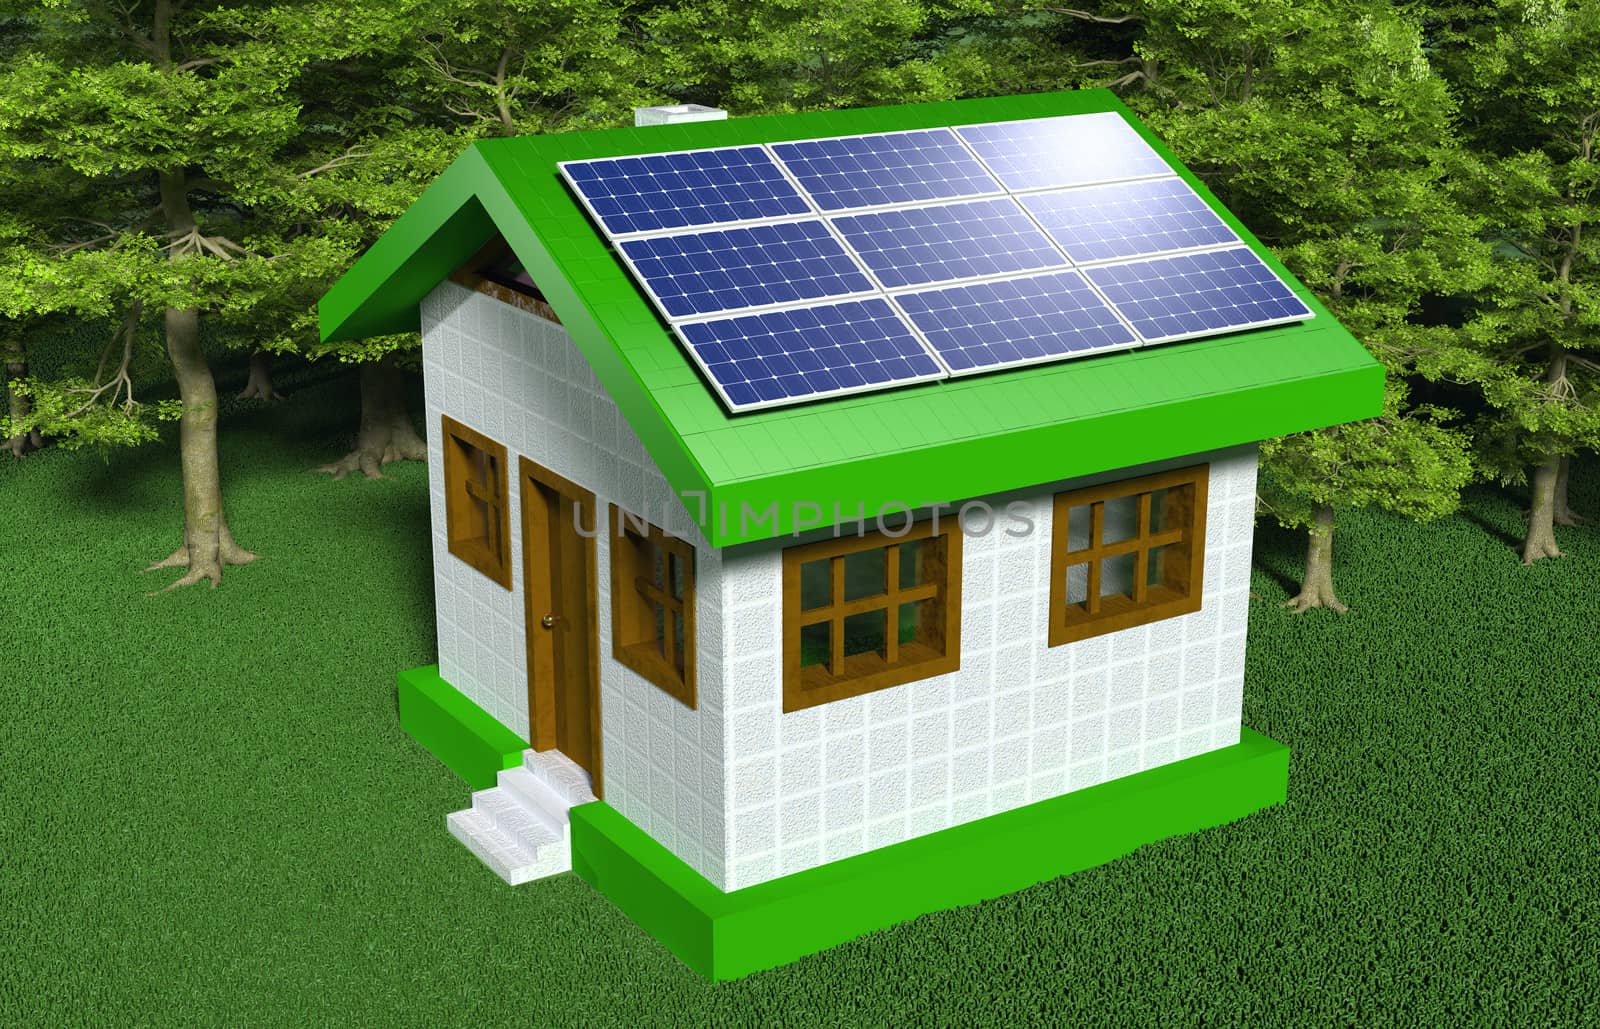 a small house with white walls and green roof has some solar panels placed on one side of the roof with the sun that reflects in them, on a grassy ground and trees behind it